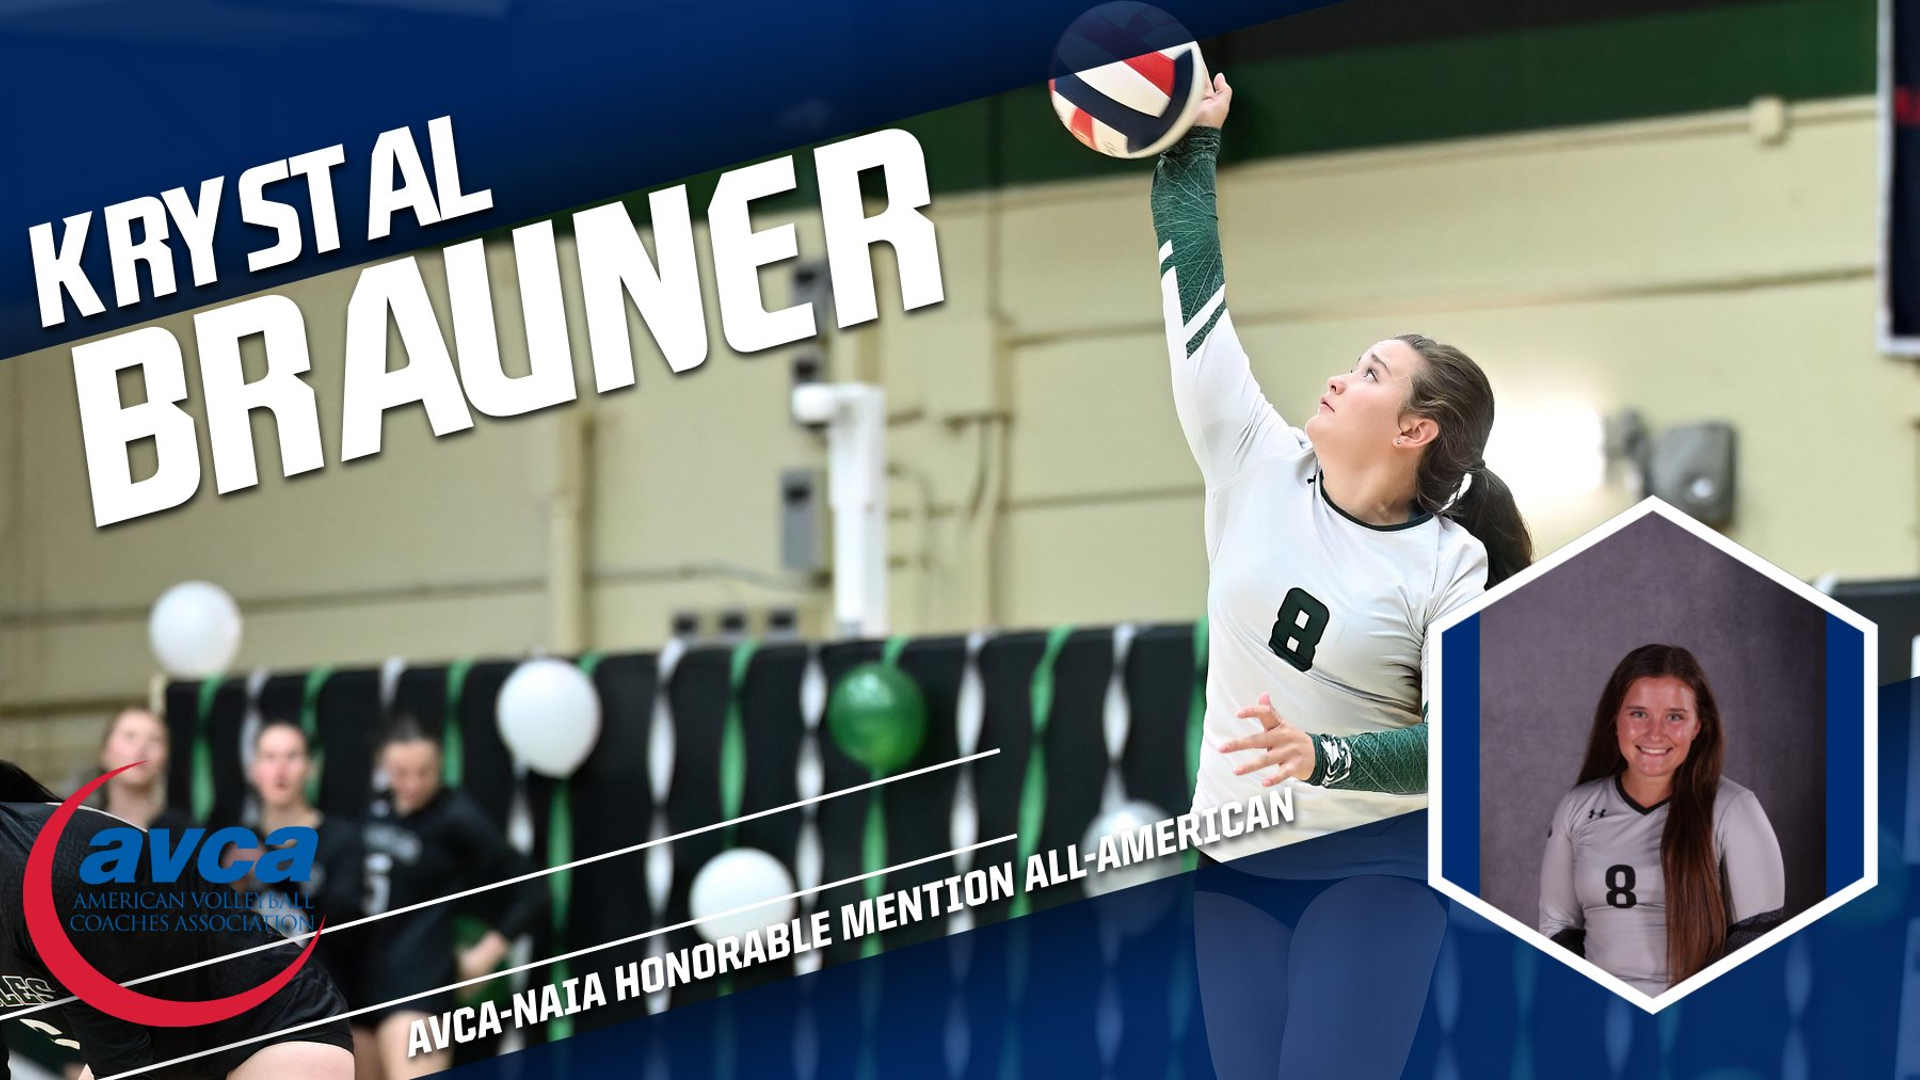 Brauner Named Honorable Mention All-American by AVCA